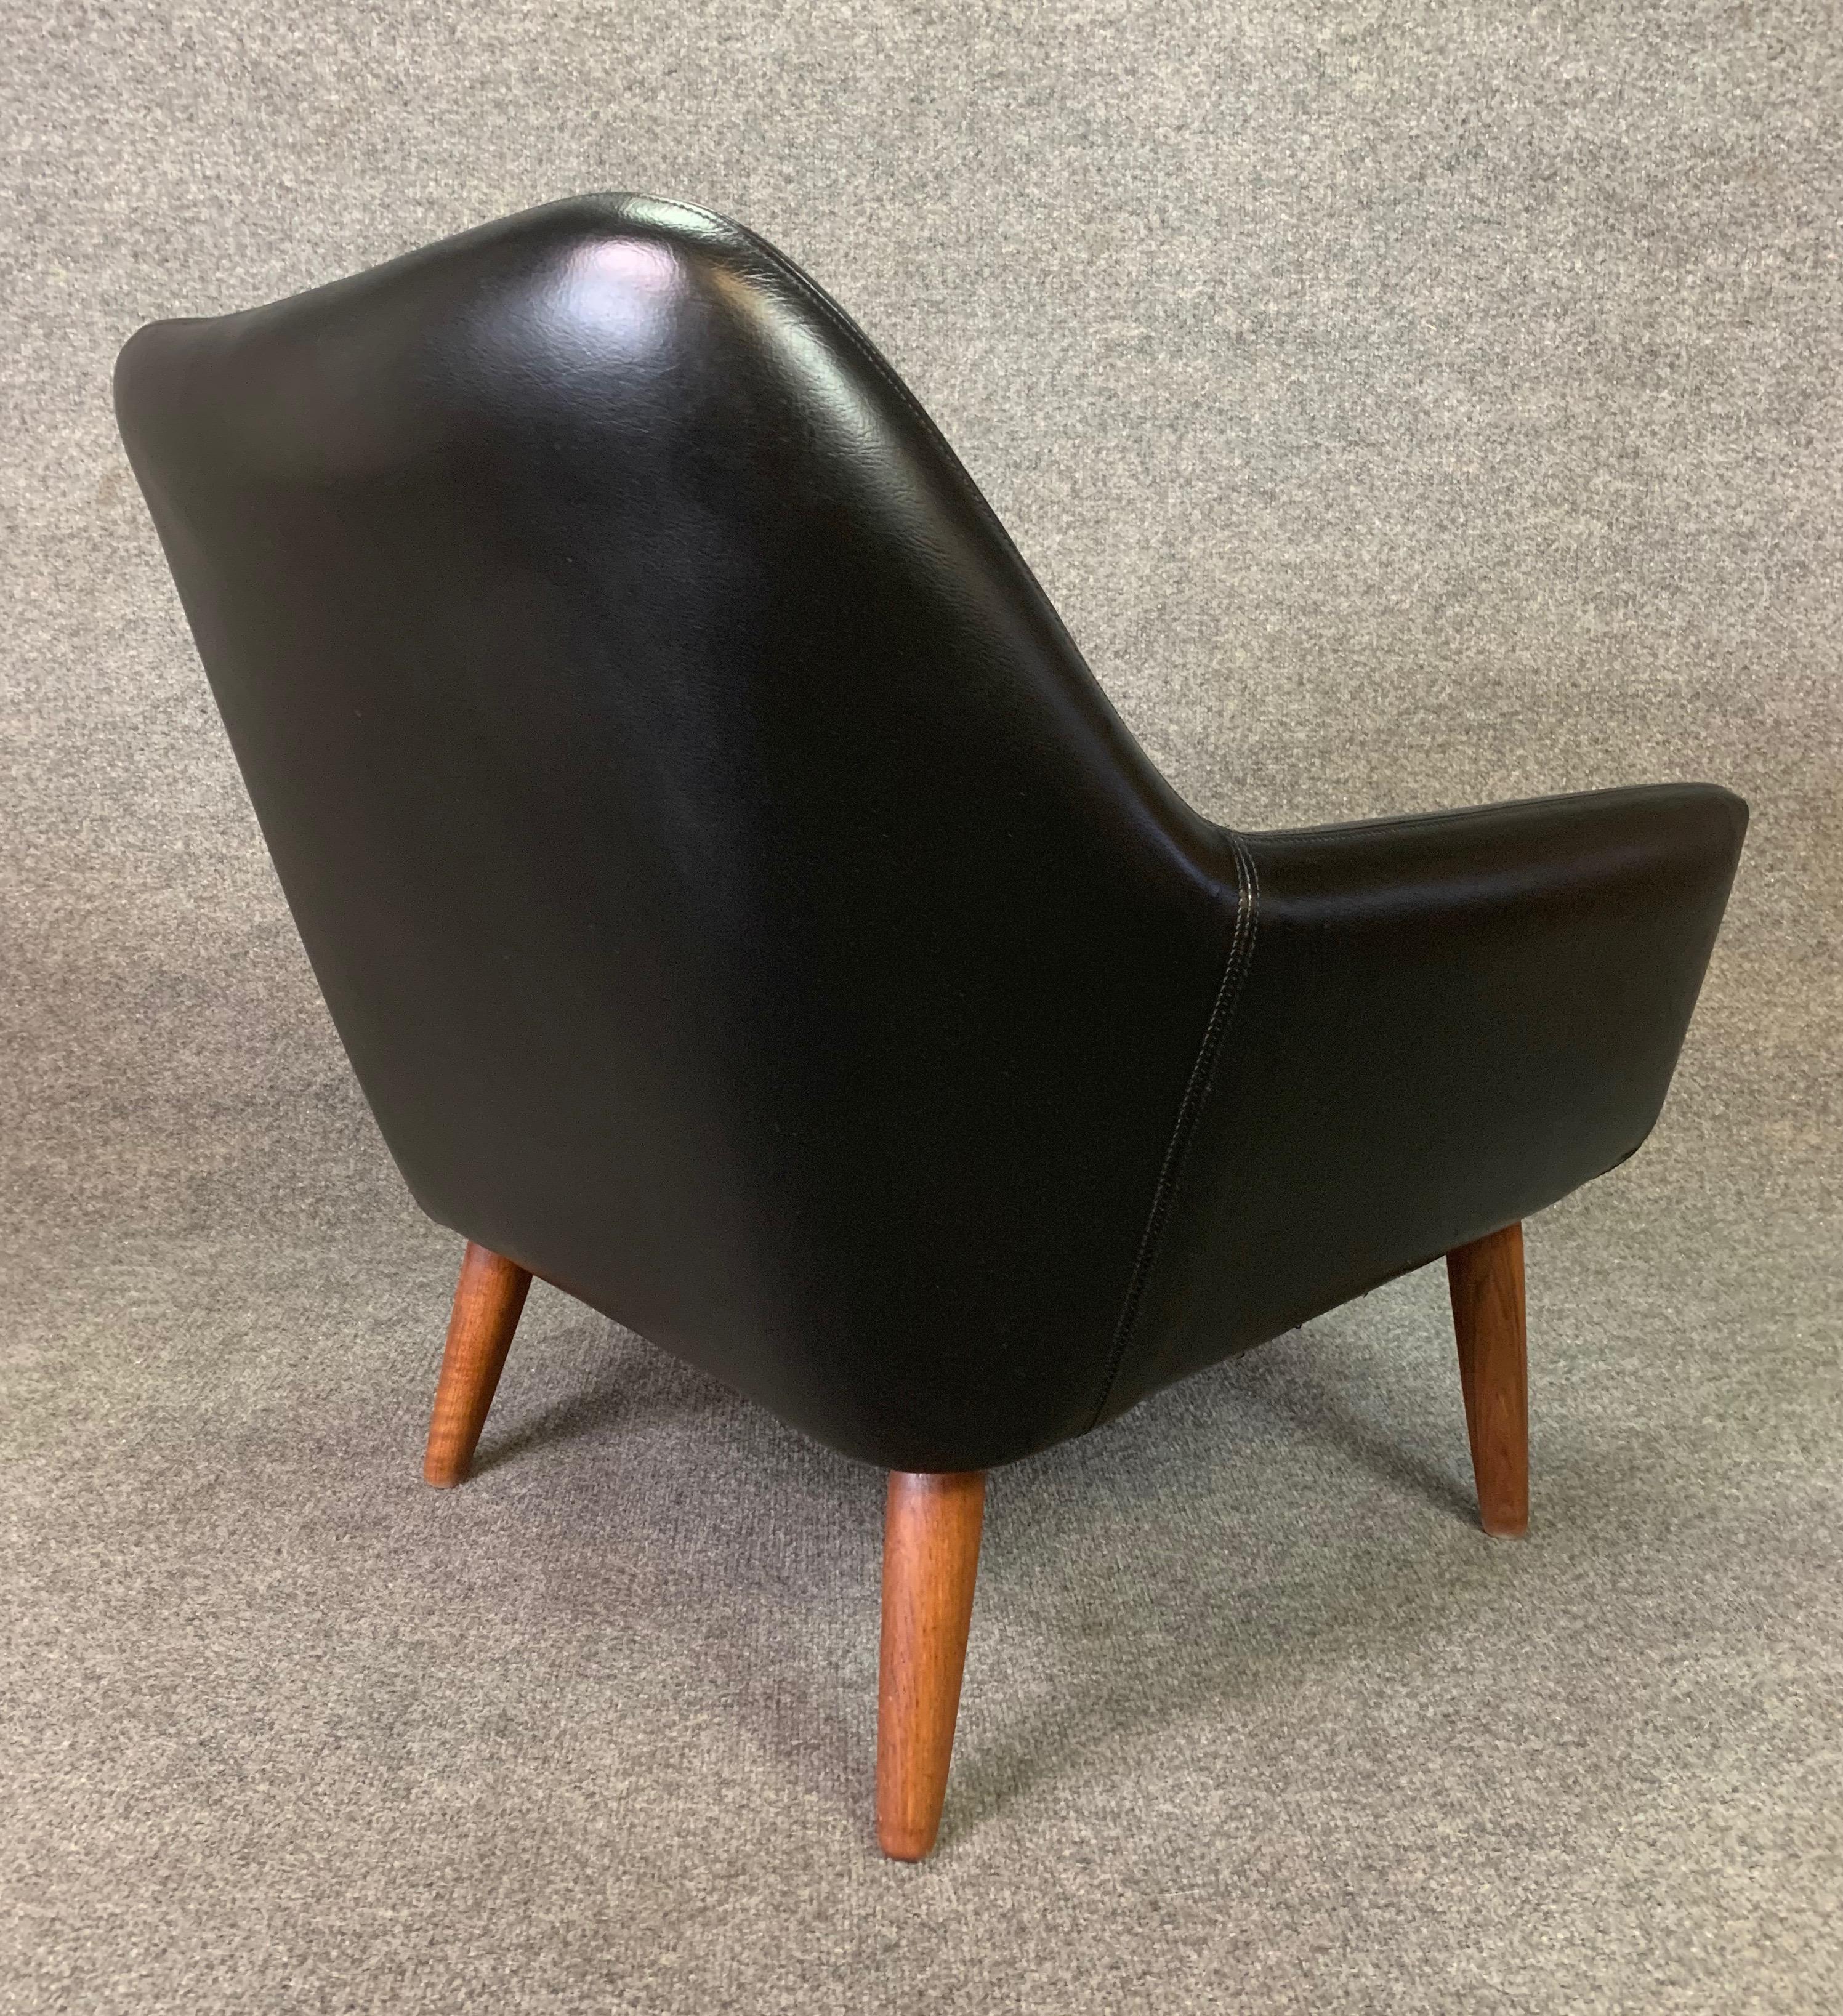 Vintage Danish Mid-Century Modern Leather and Teak Lounge Chair For Sale 1